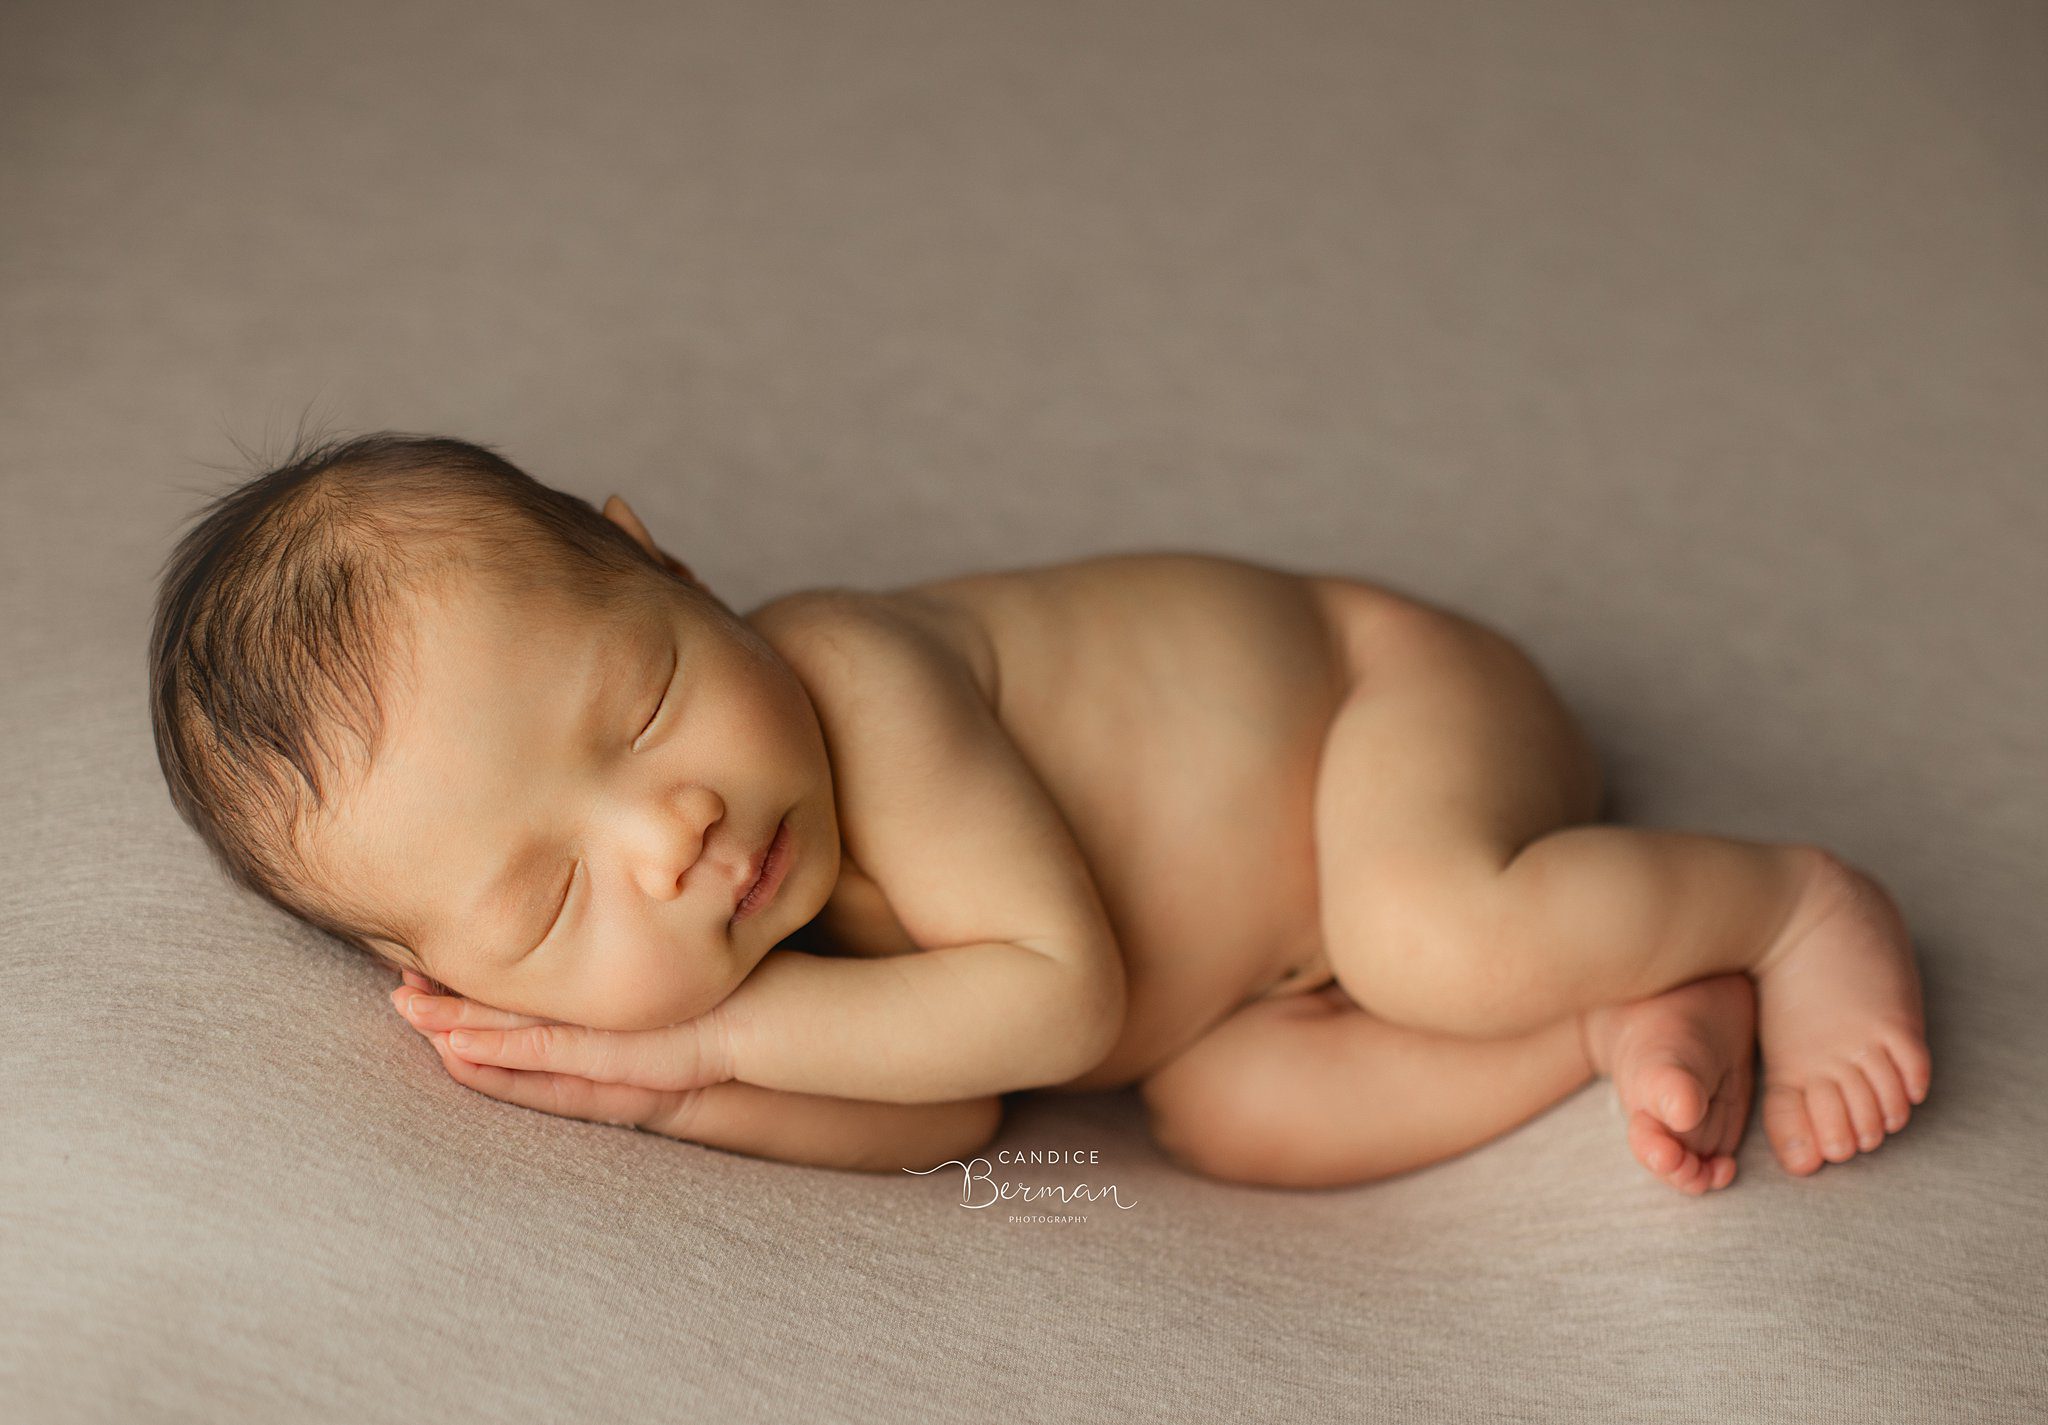 A newborn baby sleeps on its side resting its head on its hands in a studio